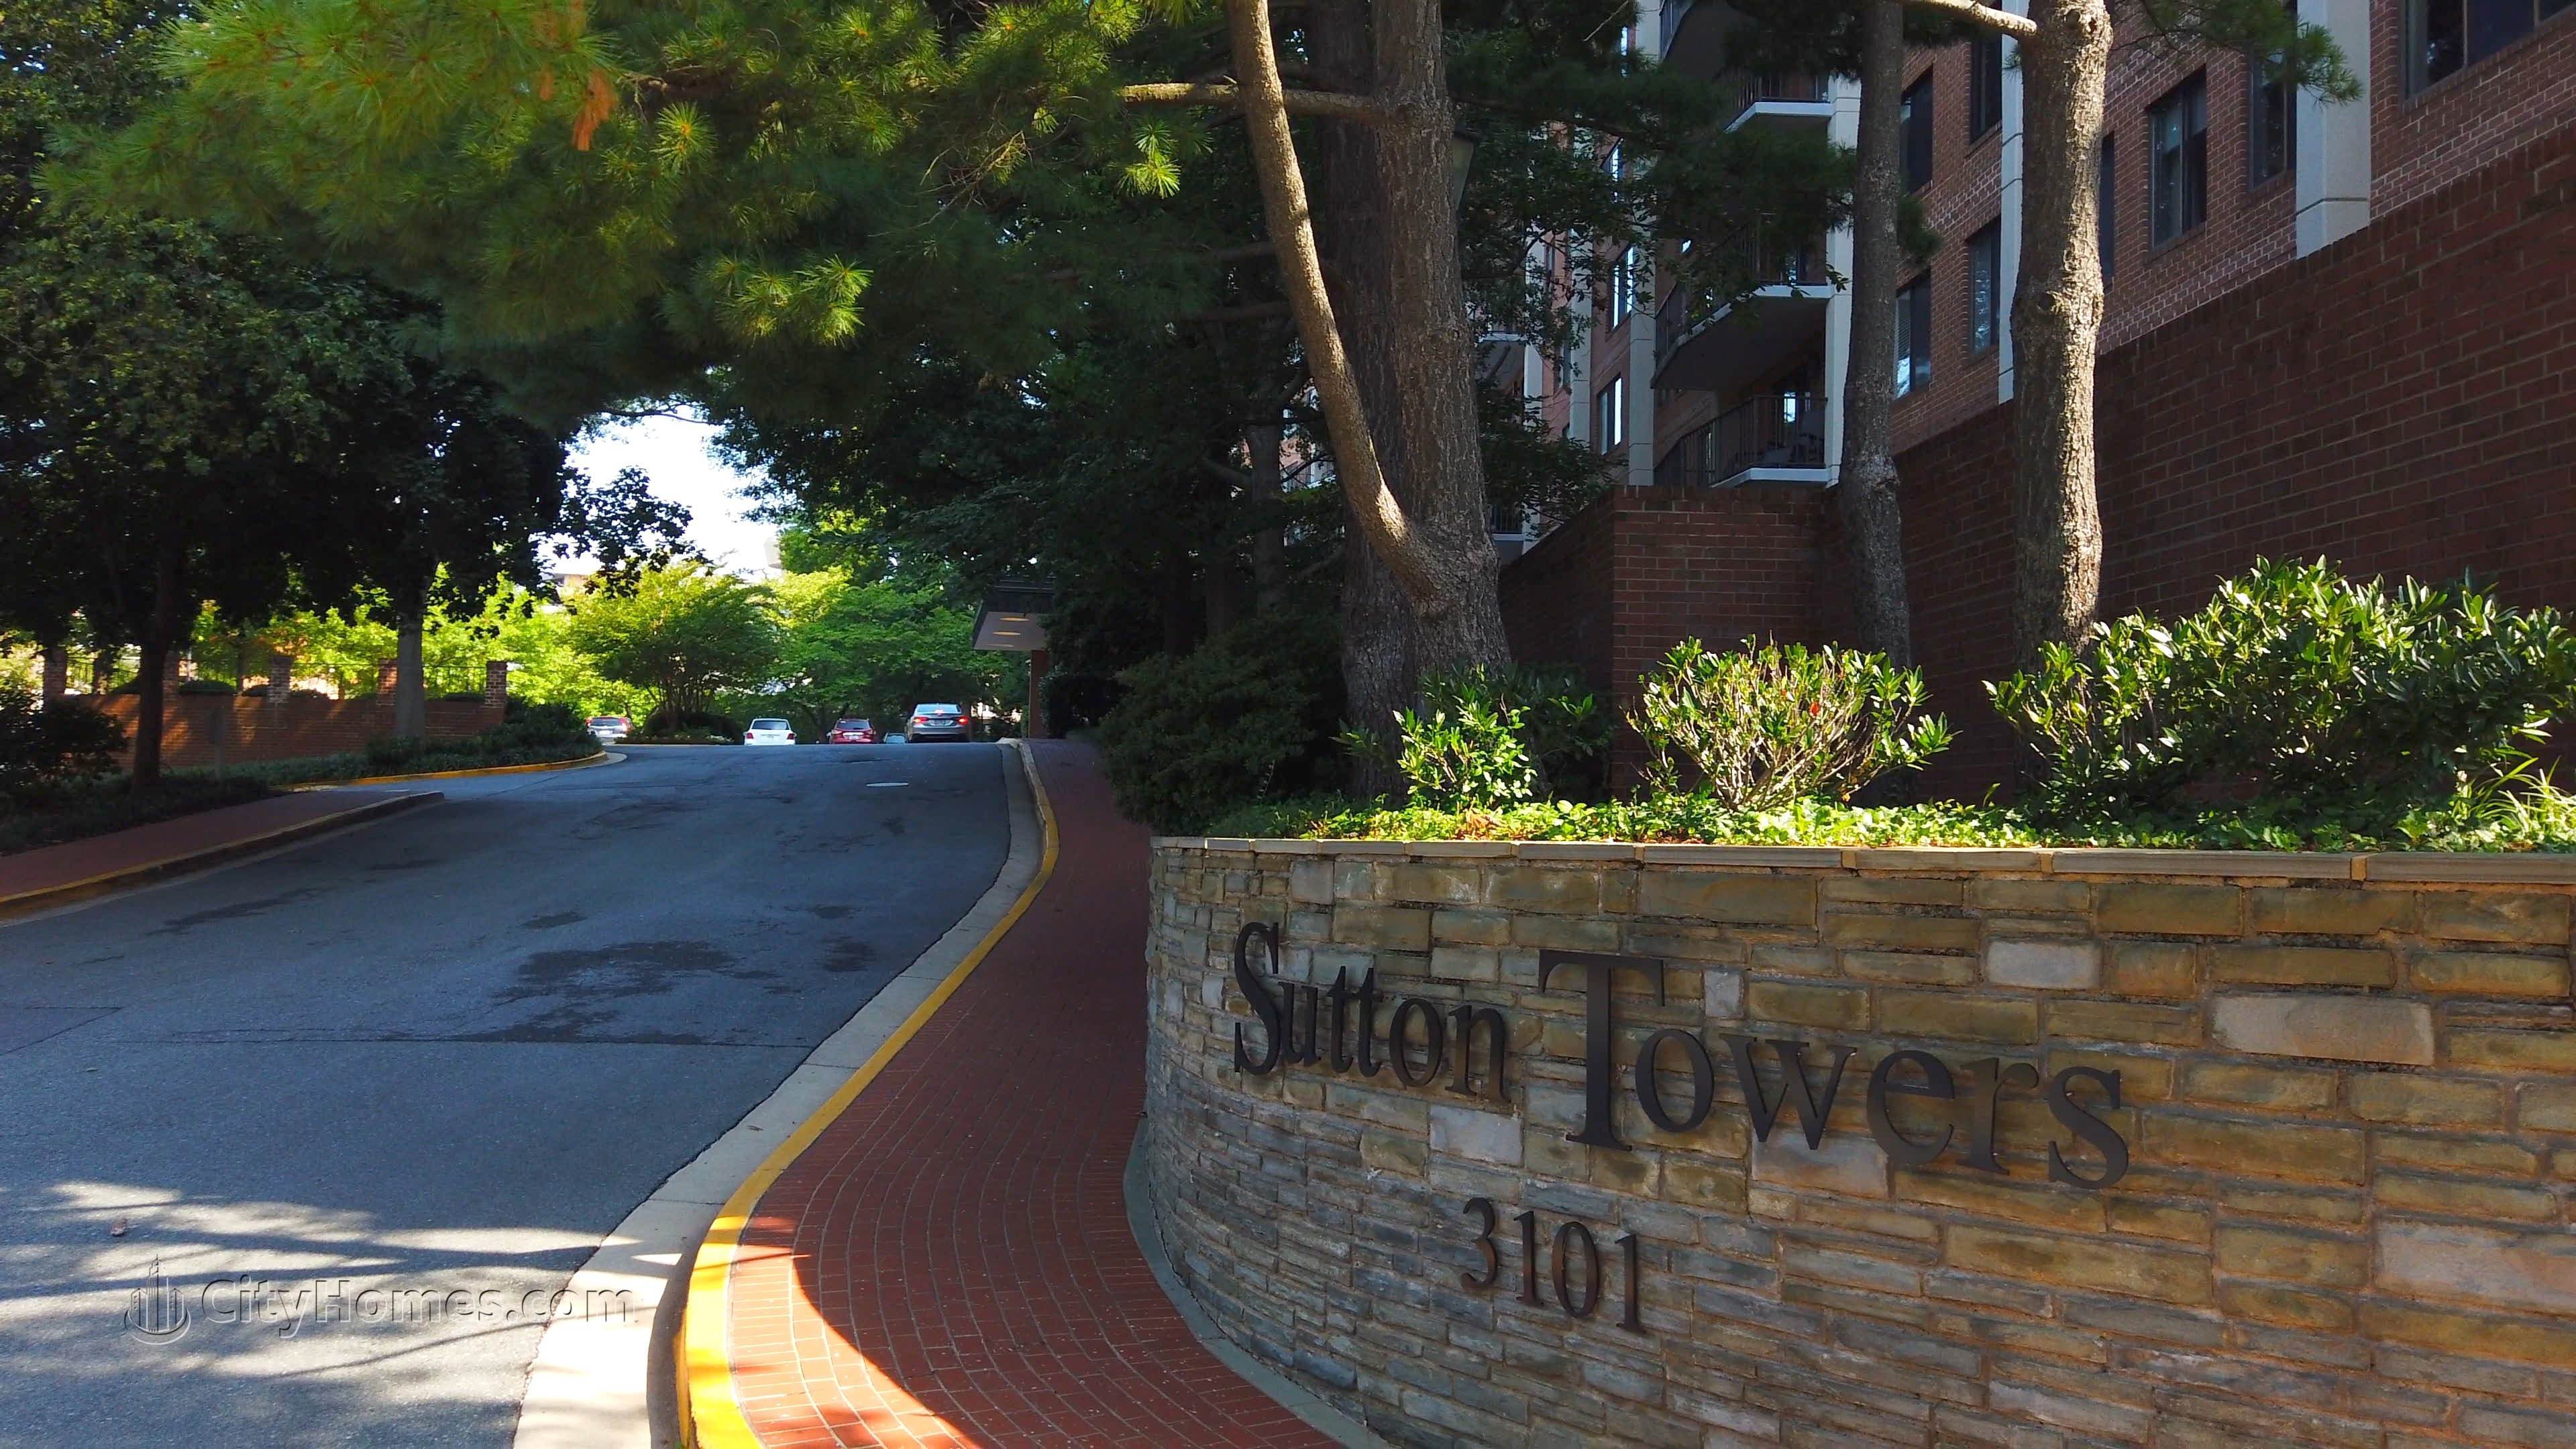 Sutton Towers bâtiment à 3101 New Mexico Ave NW, Wesley Heights, Washington, DC 20016